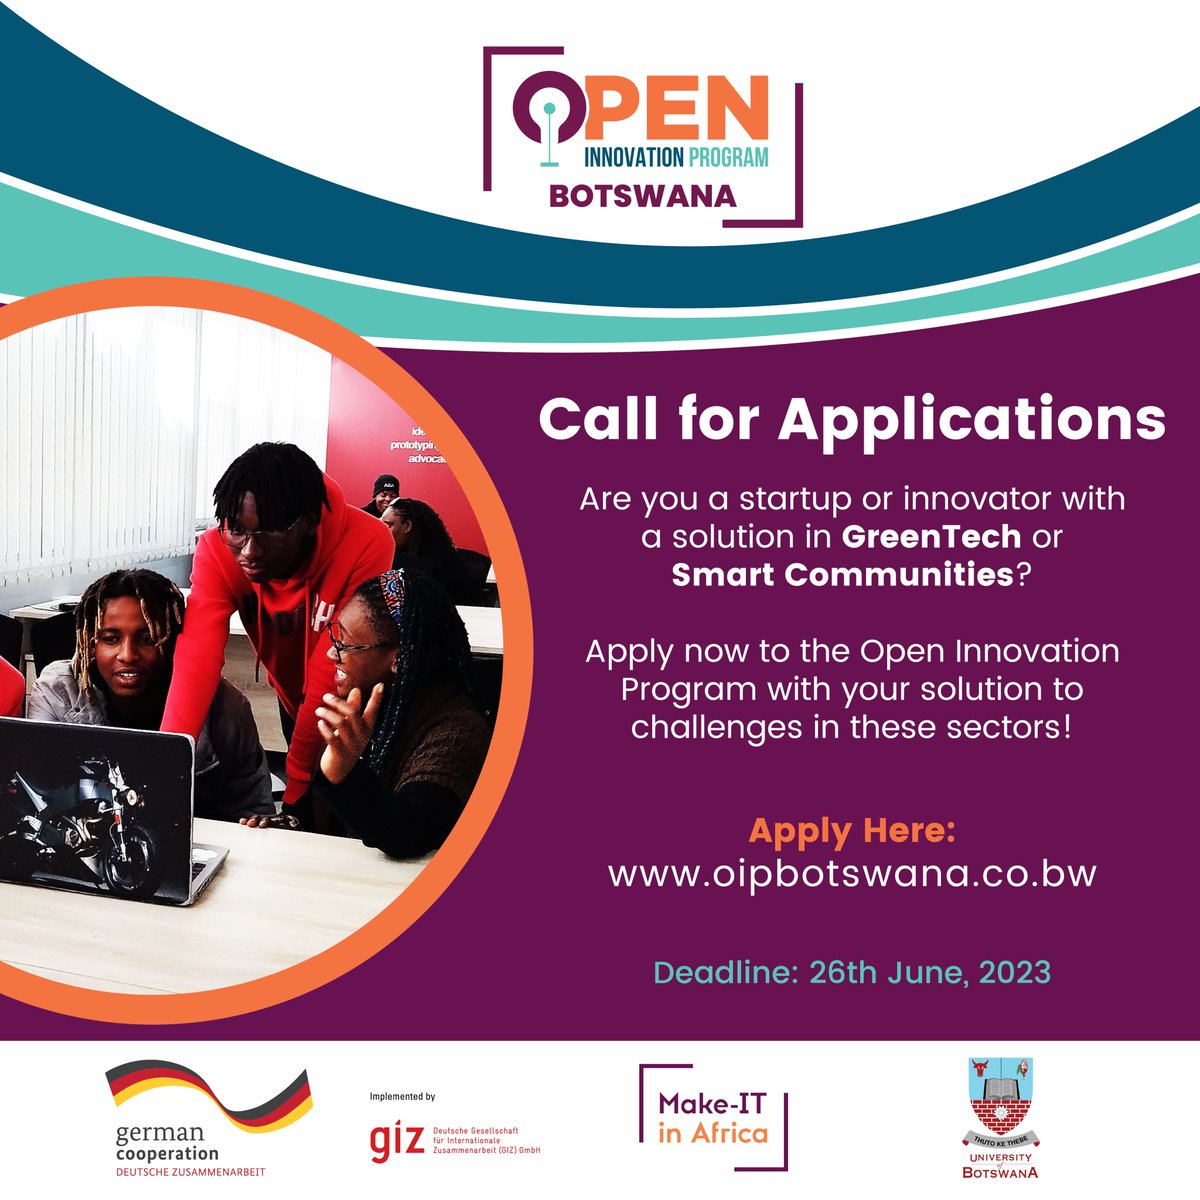 #Reminder #CallForApplications #Deadline26June

OPEN INNOVATION PROGRAMME - BOTSWANA

Are you a startup or innovator with a solution in GreenTech or Smart Communities?
Apply here: oipbotswana.co.bw